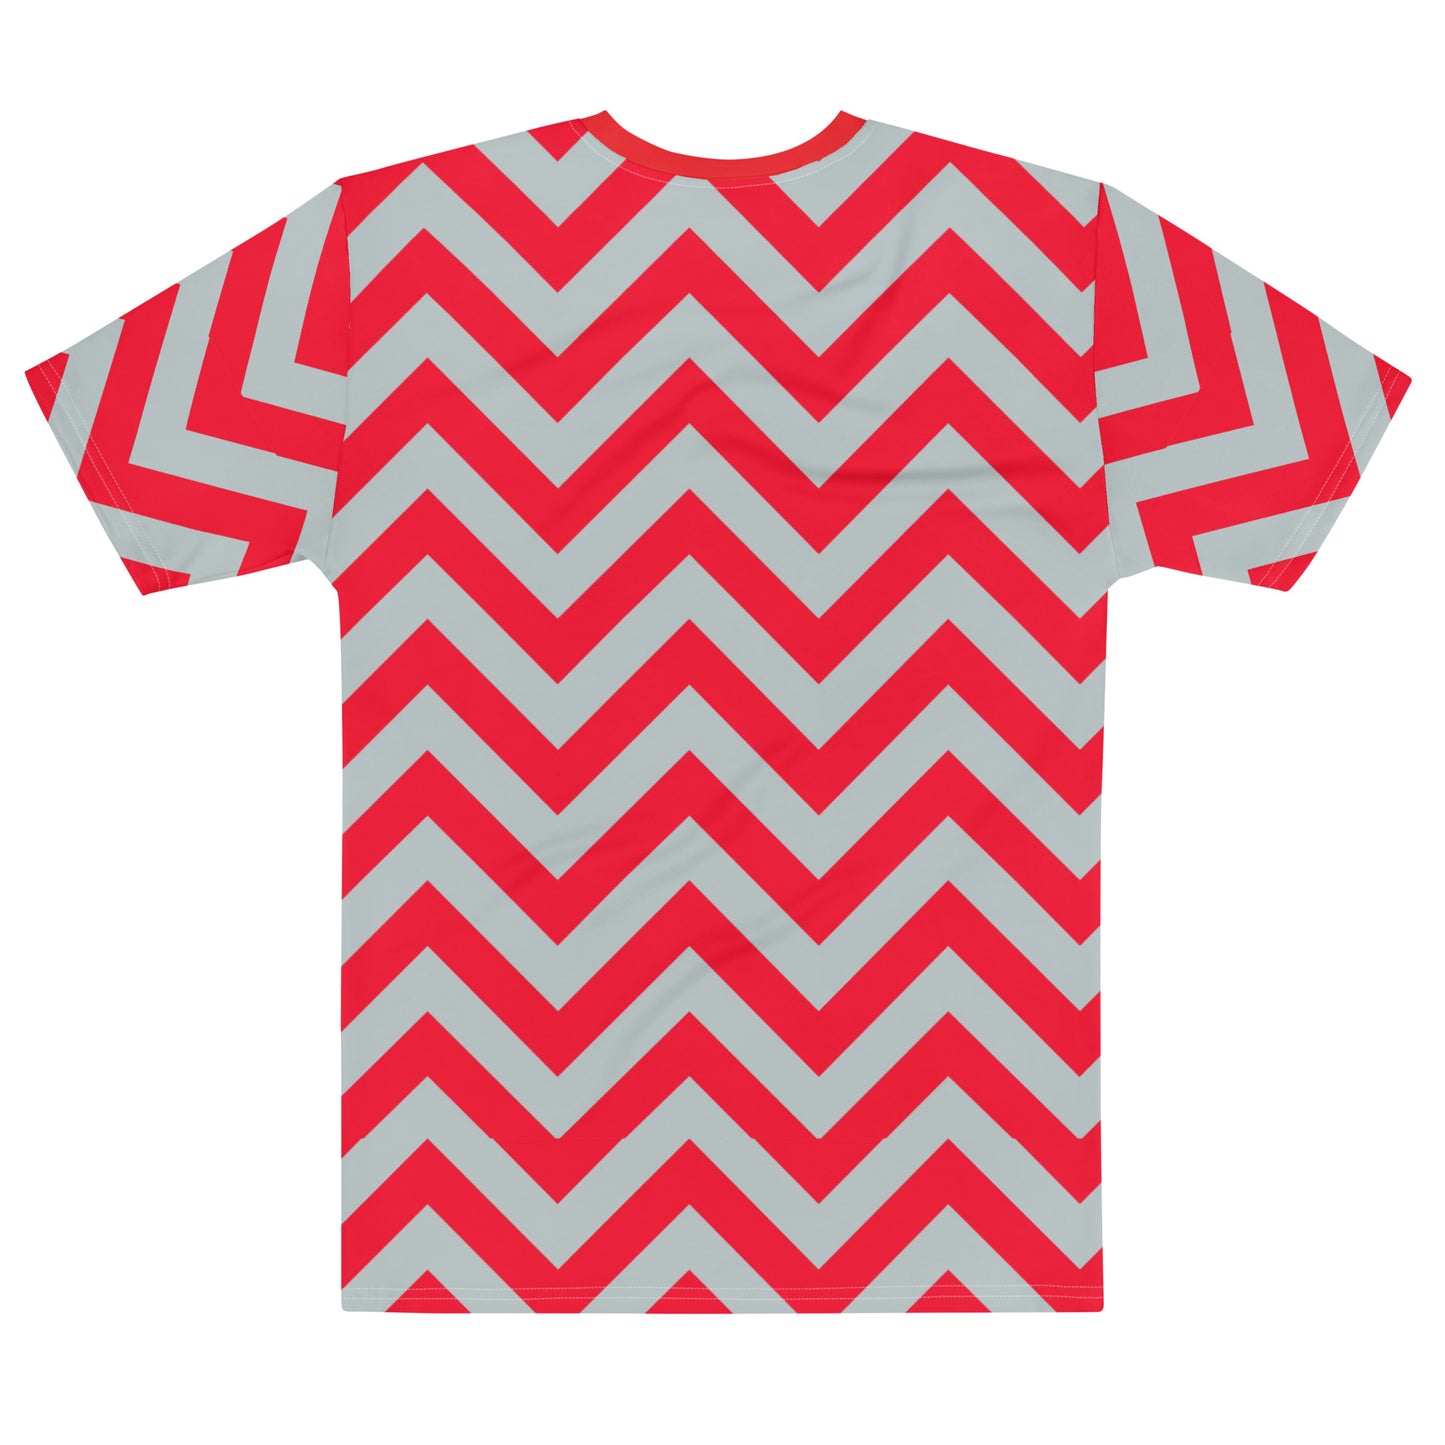 Zigzag - Inspired By Harry Styles - Sustainably Made Men’s Short Sleeve Teed Diamond - Inspired By Harry Styles - Sustainably Made Men’s Short Sleeve Tee